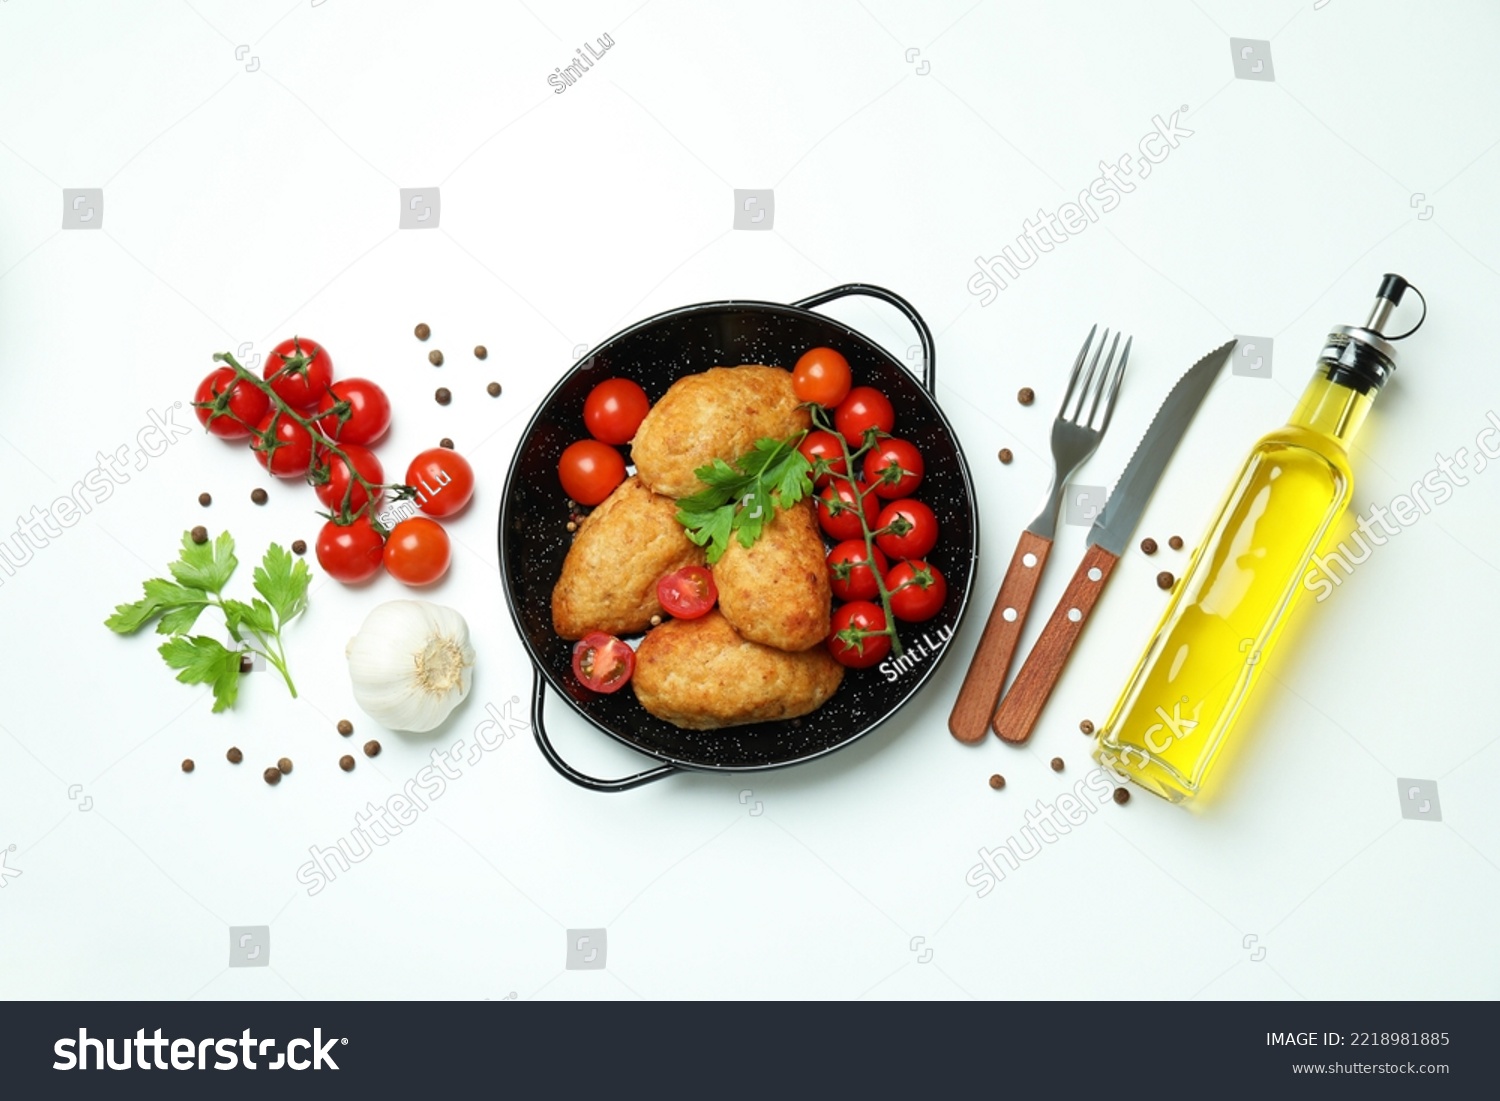 Concept of tasty food with cutlets on white background #2218981885